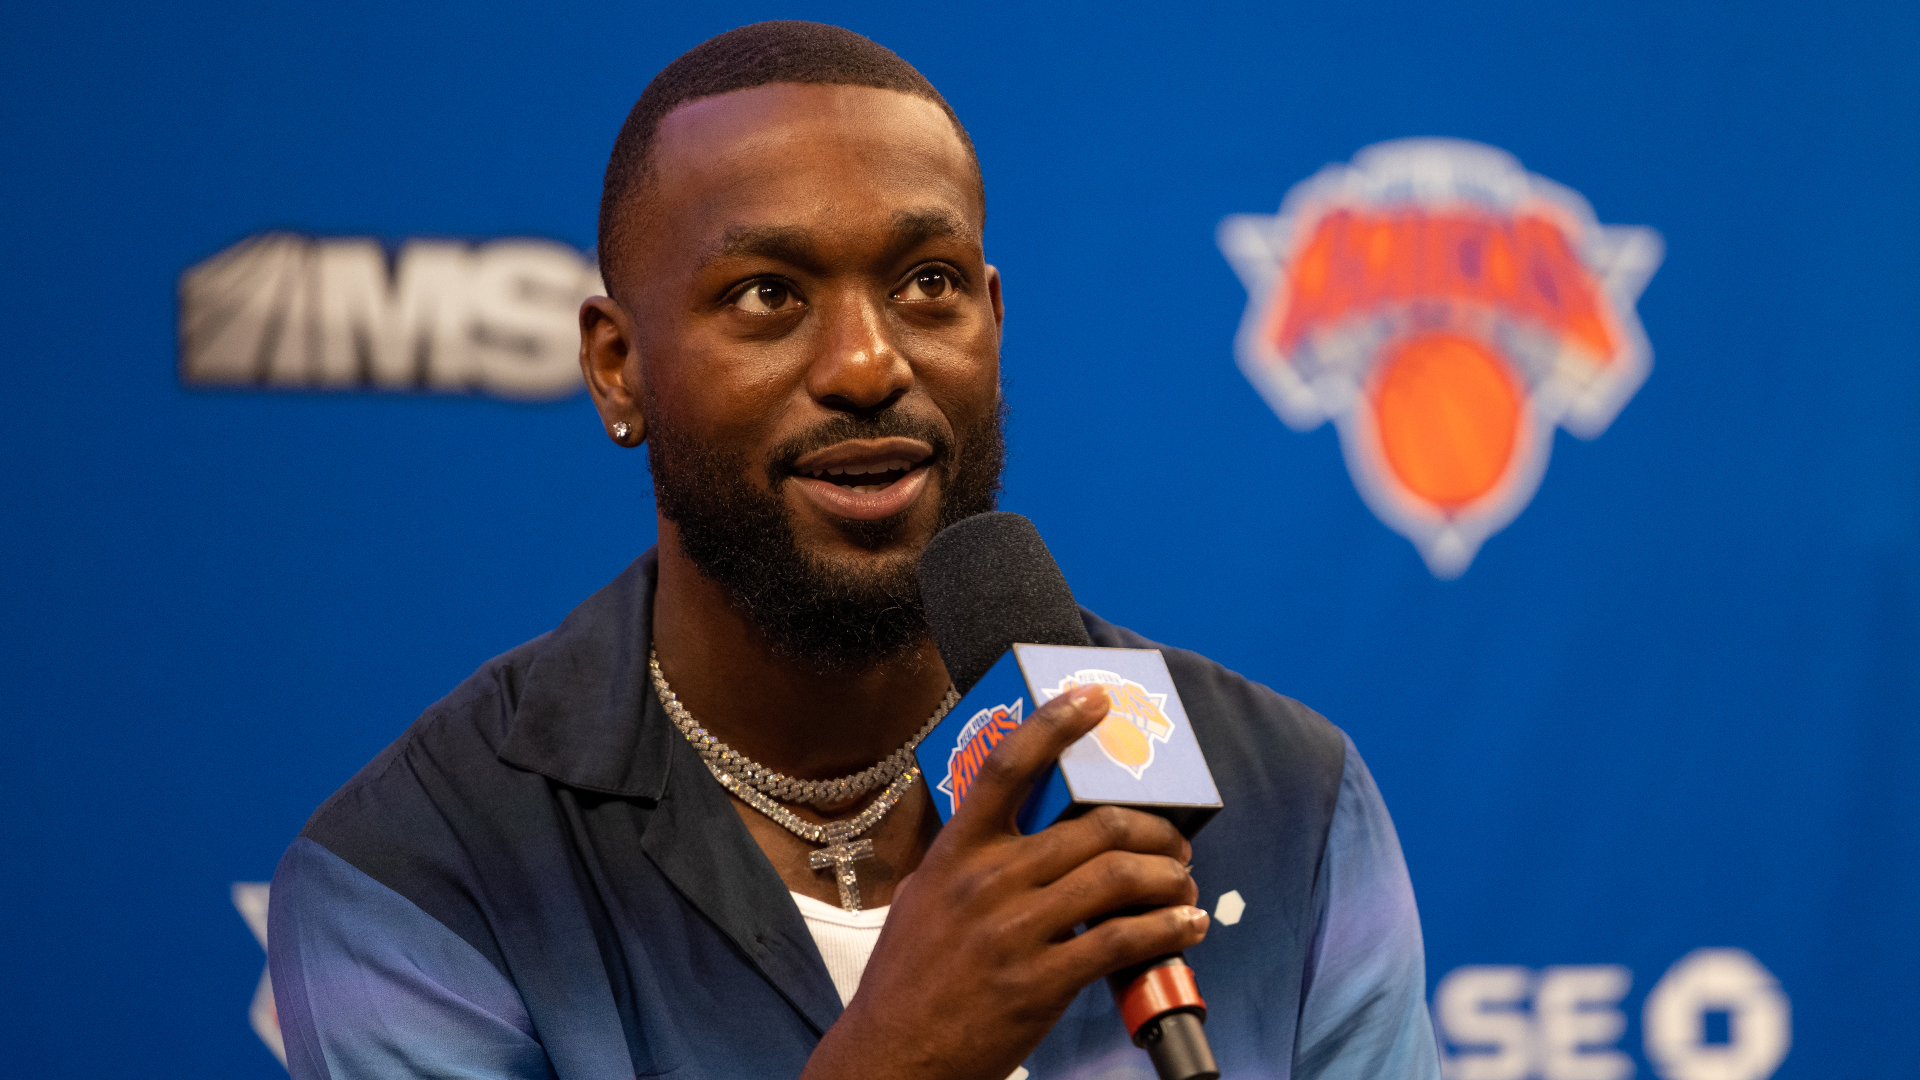 Kemba Walker had been traded to the New York Knicks and wants to prove he remains among the NBA's elite after a down 2020-21 season.